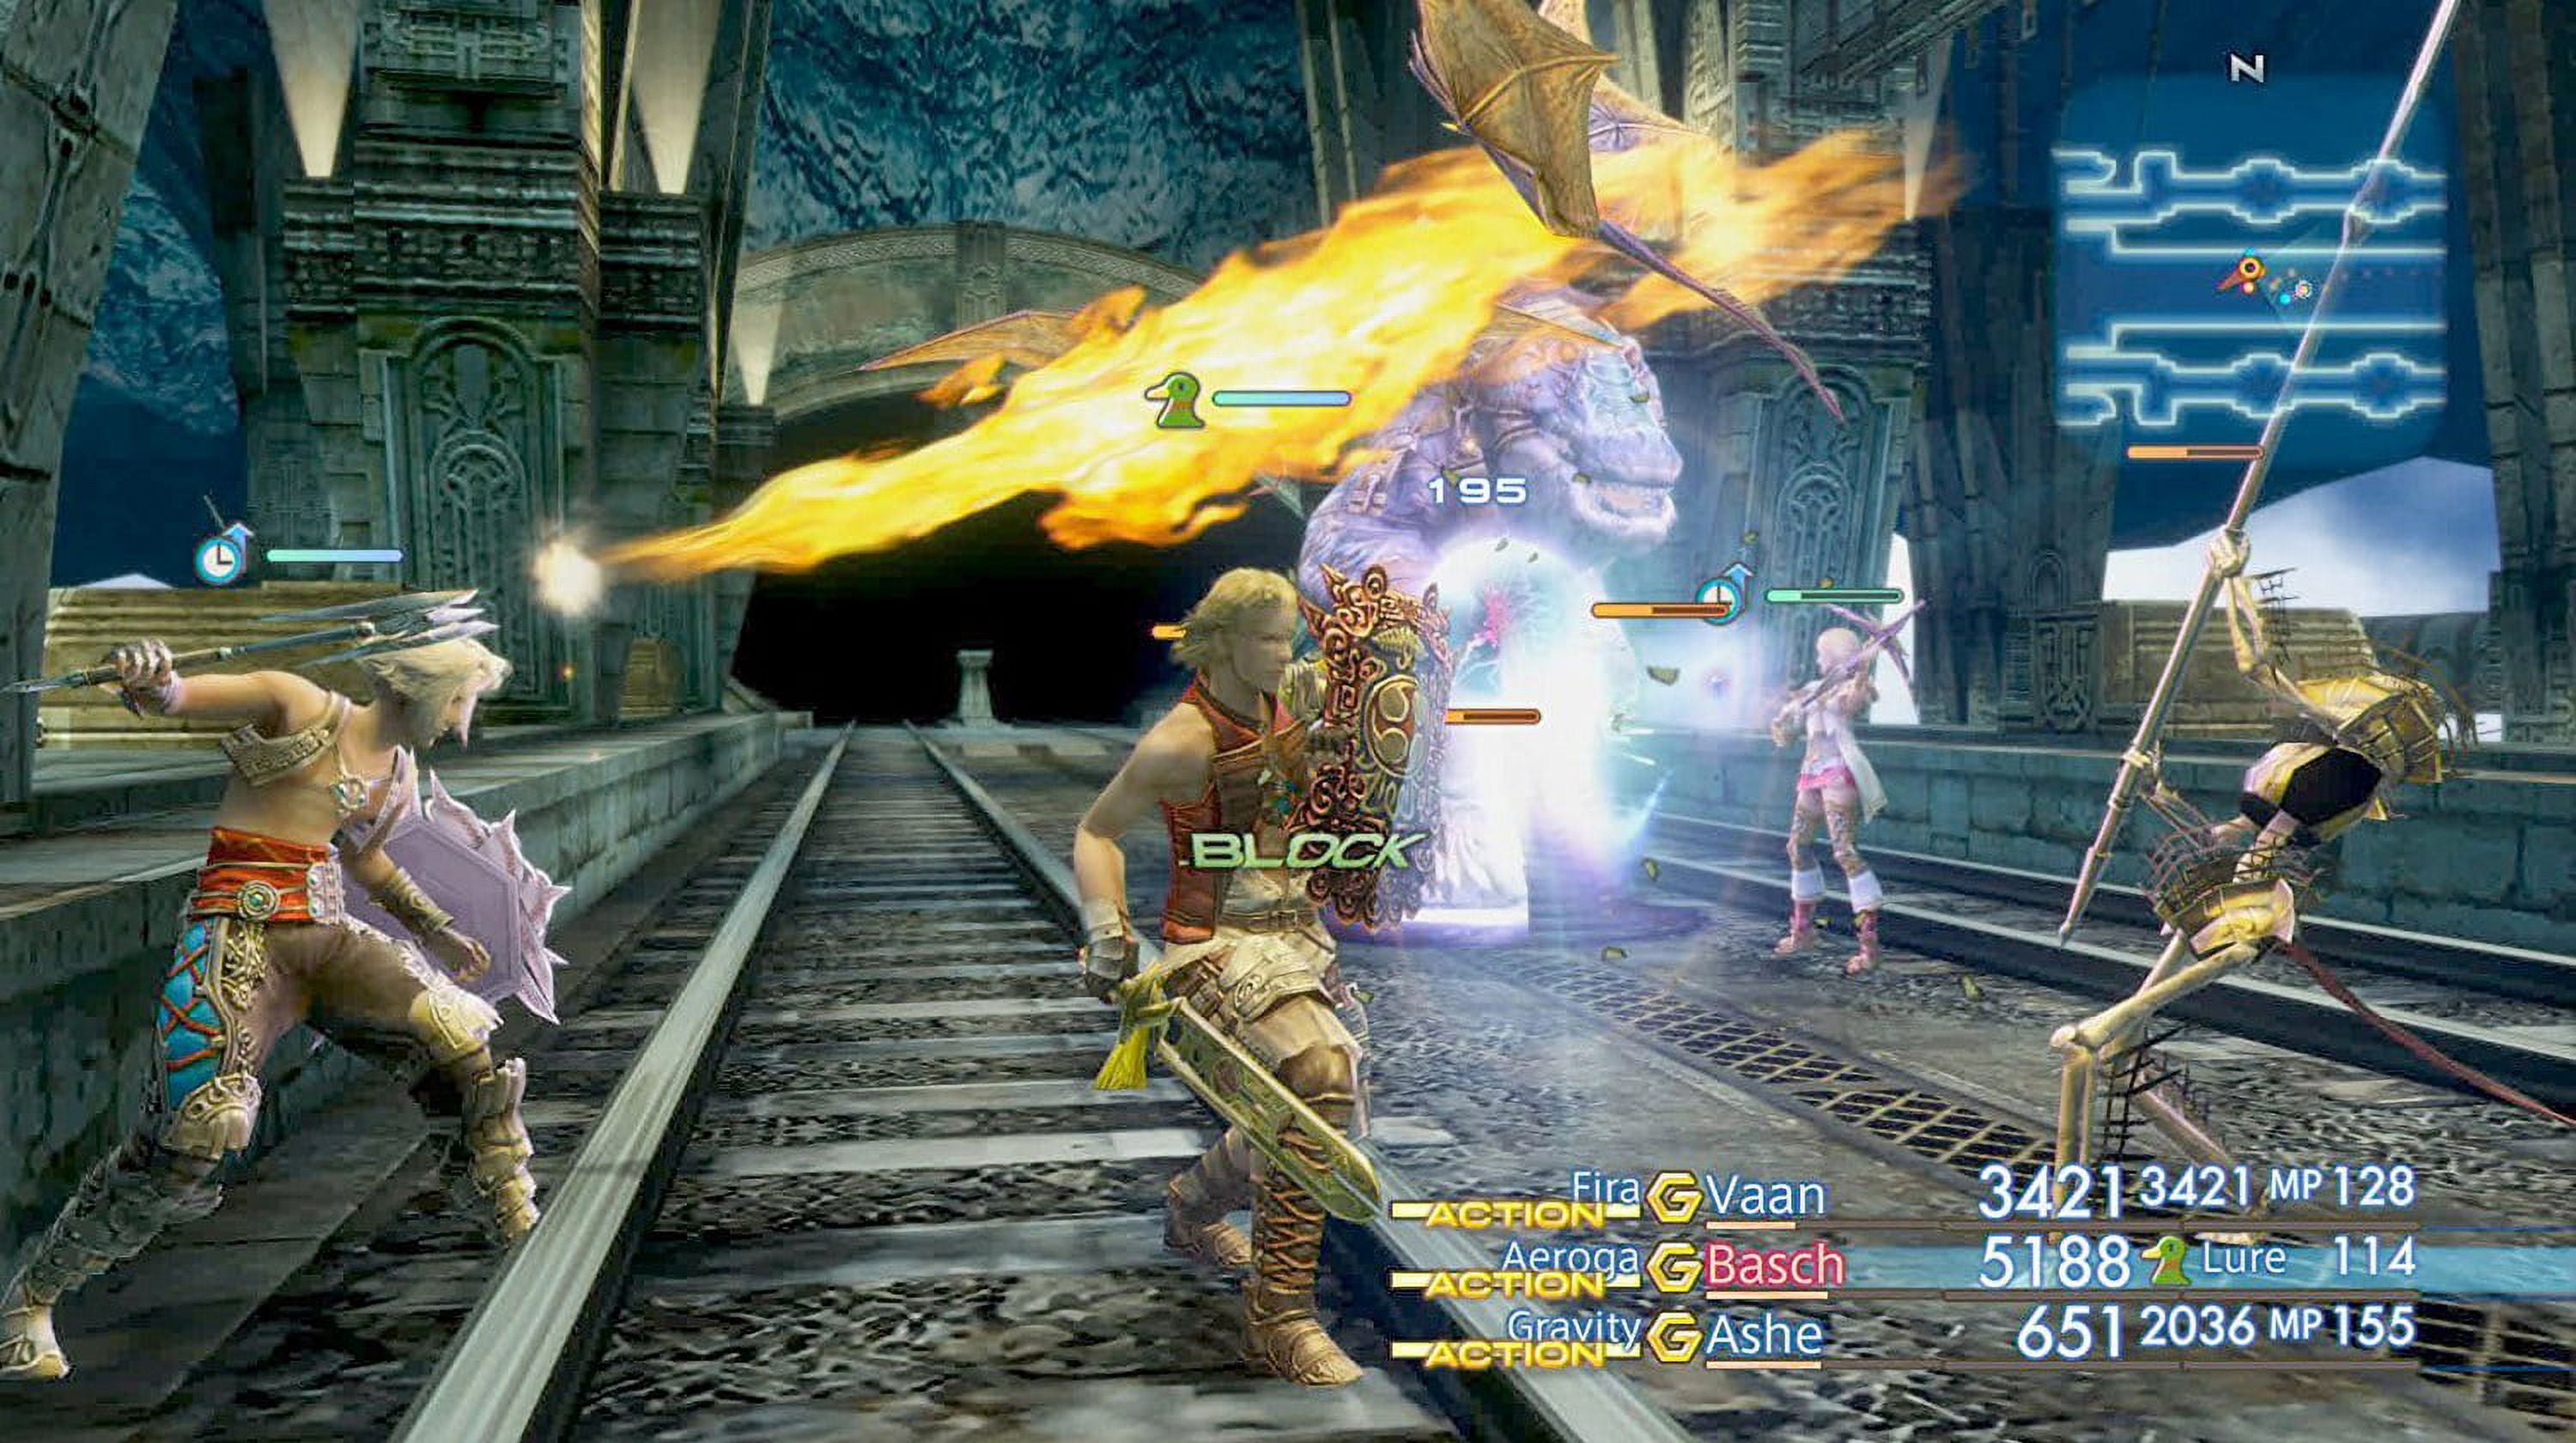 Square Enix announces re-master of Final Fantasy XII for PS4 - BBC